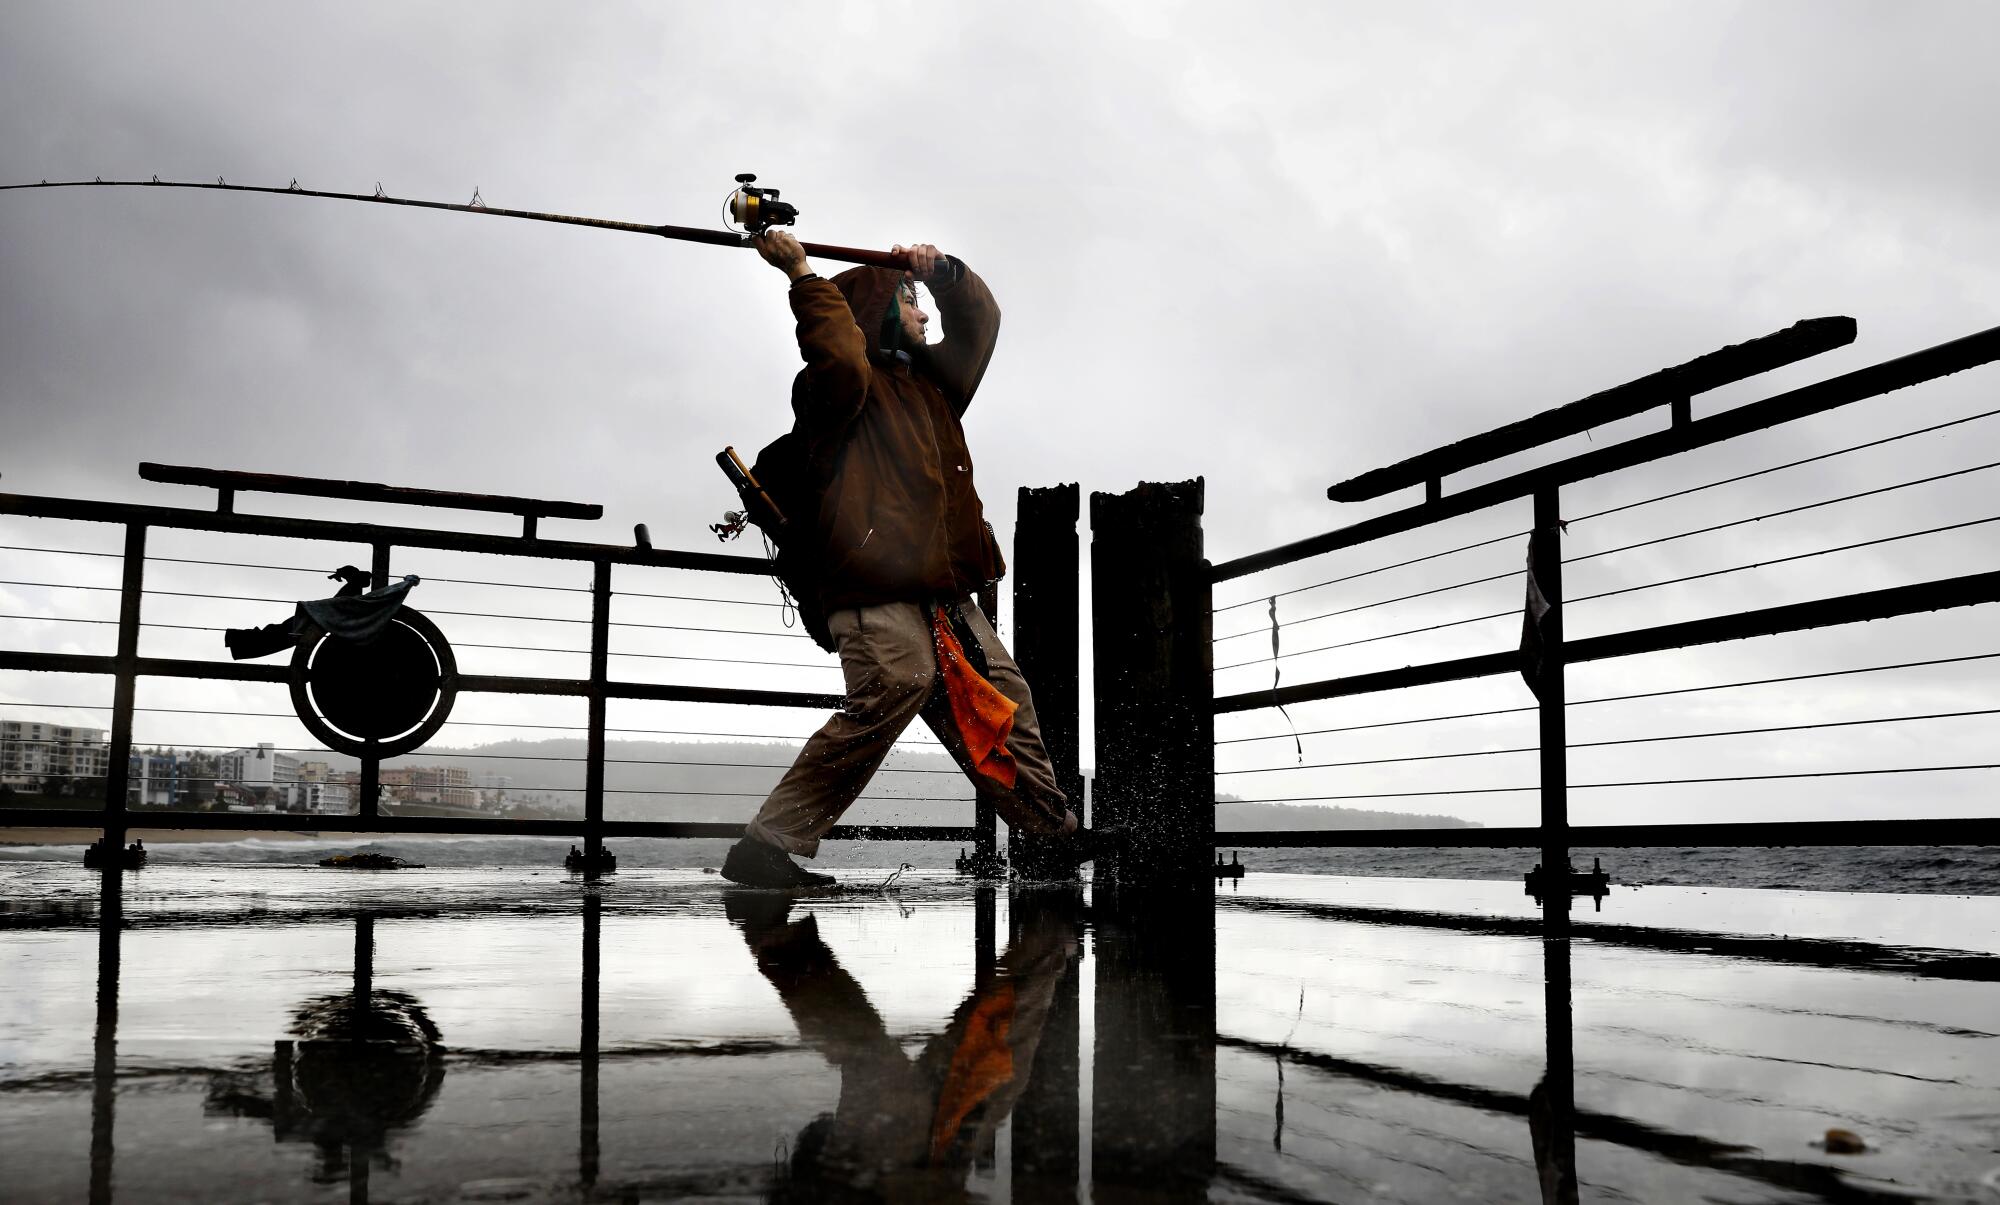 A man fishes in the rain on a pier.